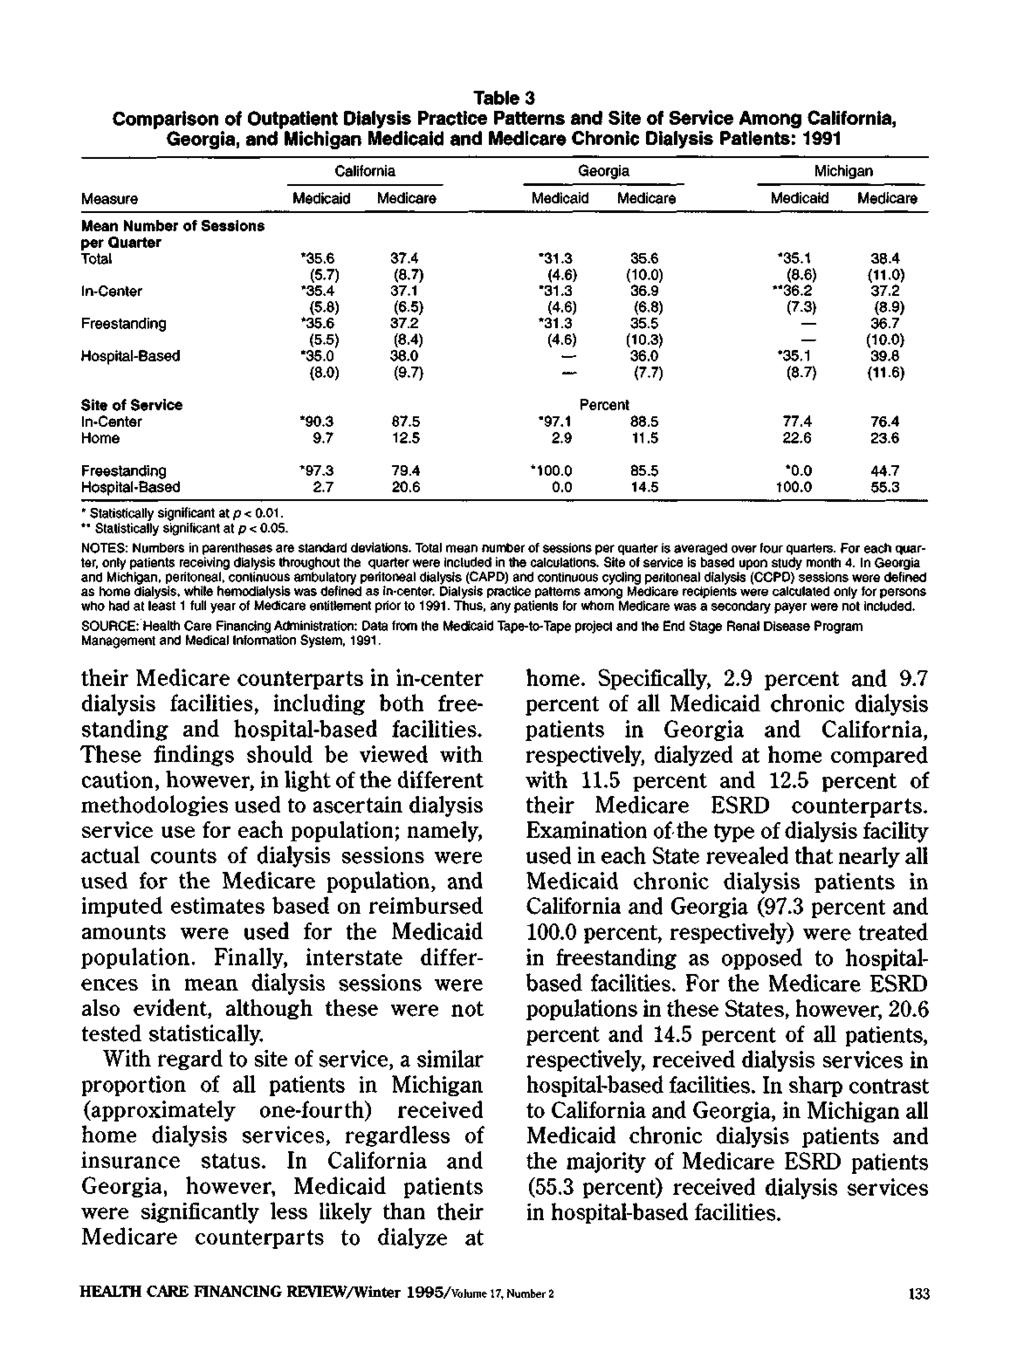 Table 3 Comparison of Outpatient Dialysis Practice Patterns and Site of Service Among California, Georgia, and Michigan and Chronic Dialysis Patients: 1991 California Georgia Michigan Measure Mean